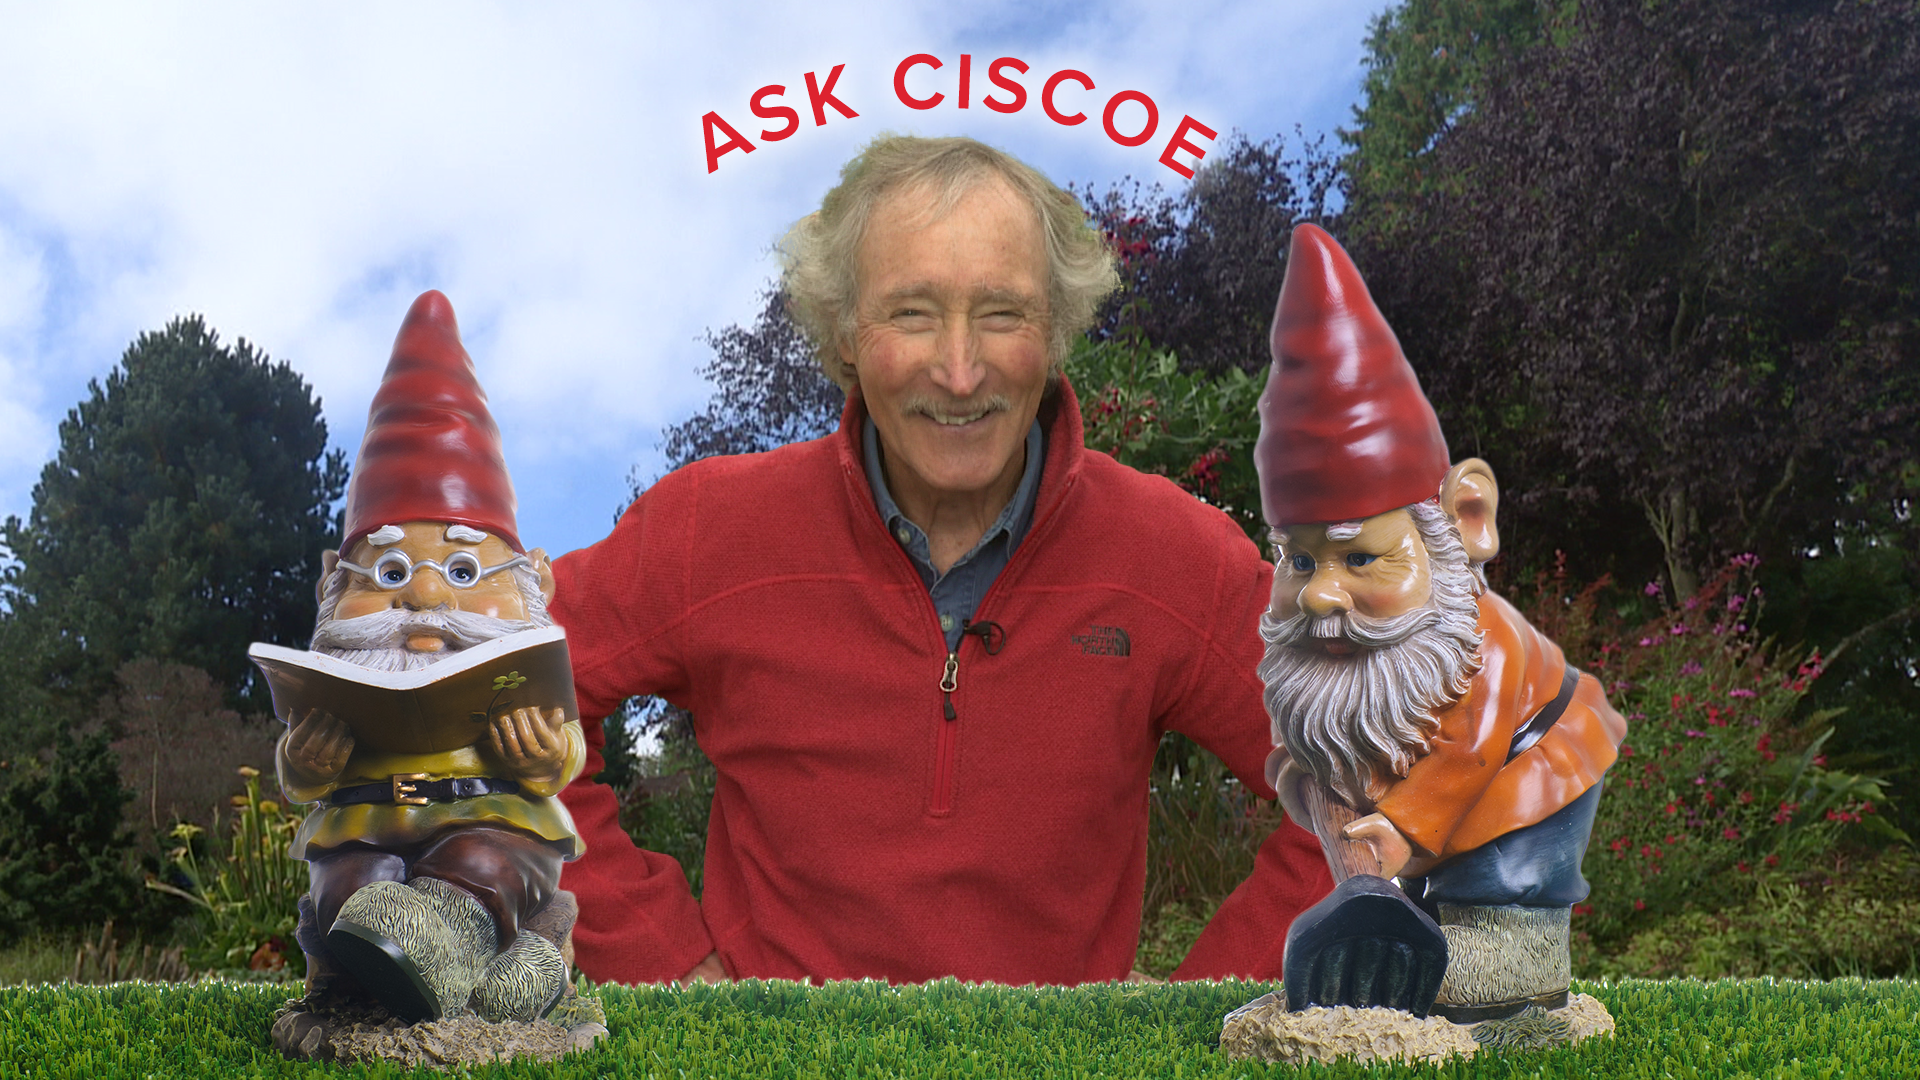 If you've got gnomes in your backyard ... we've got some bad news. 🤣 Enjoy this Q&A with Northwest Gardening Guru and all-around nice guy, Ciscoe Morris.